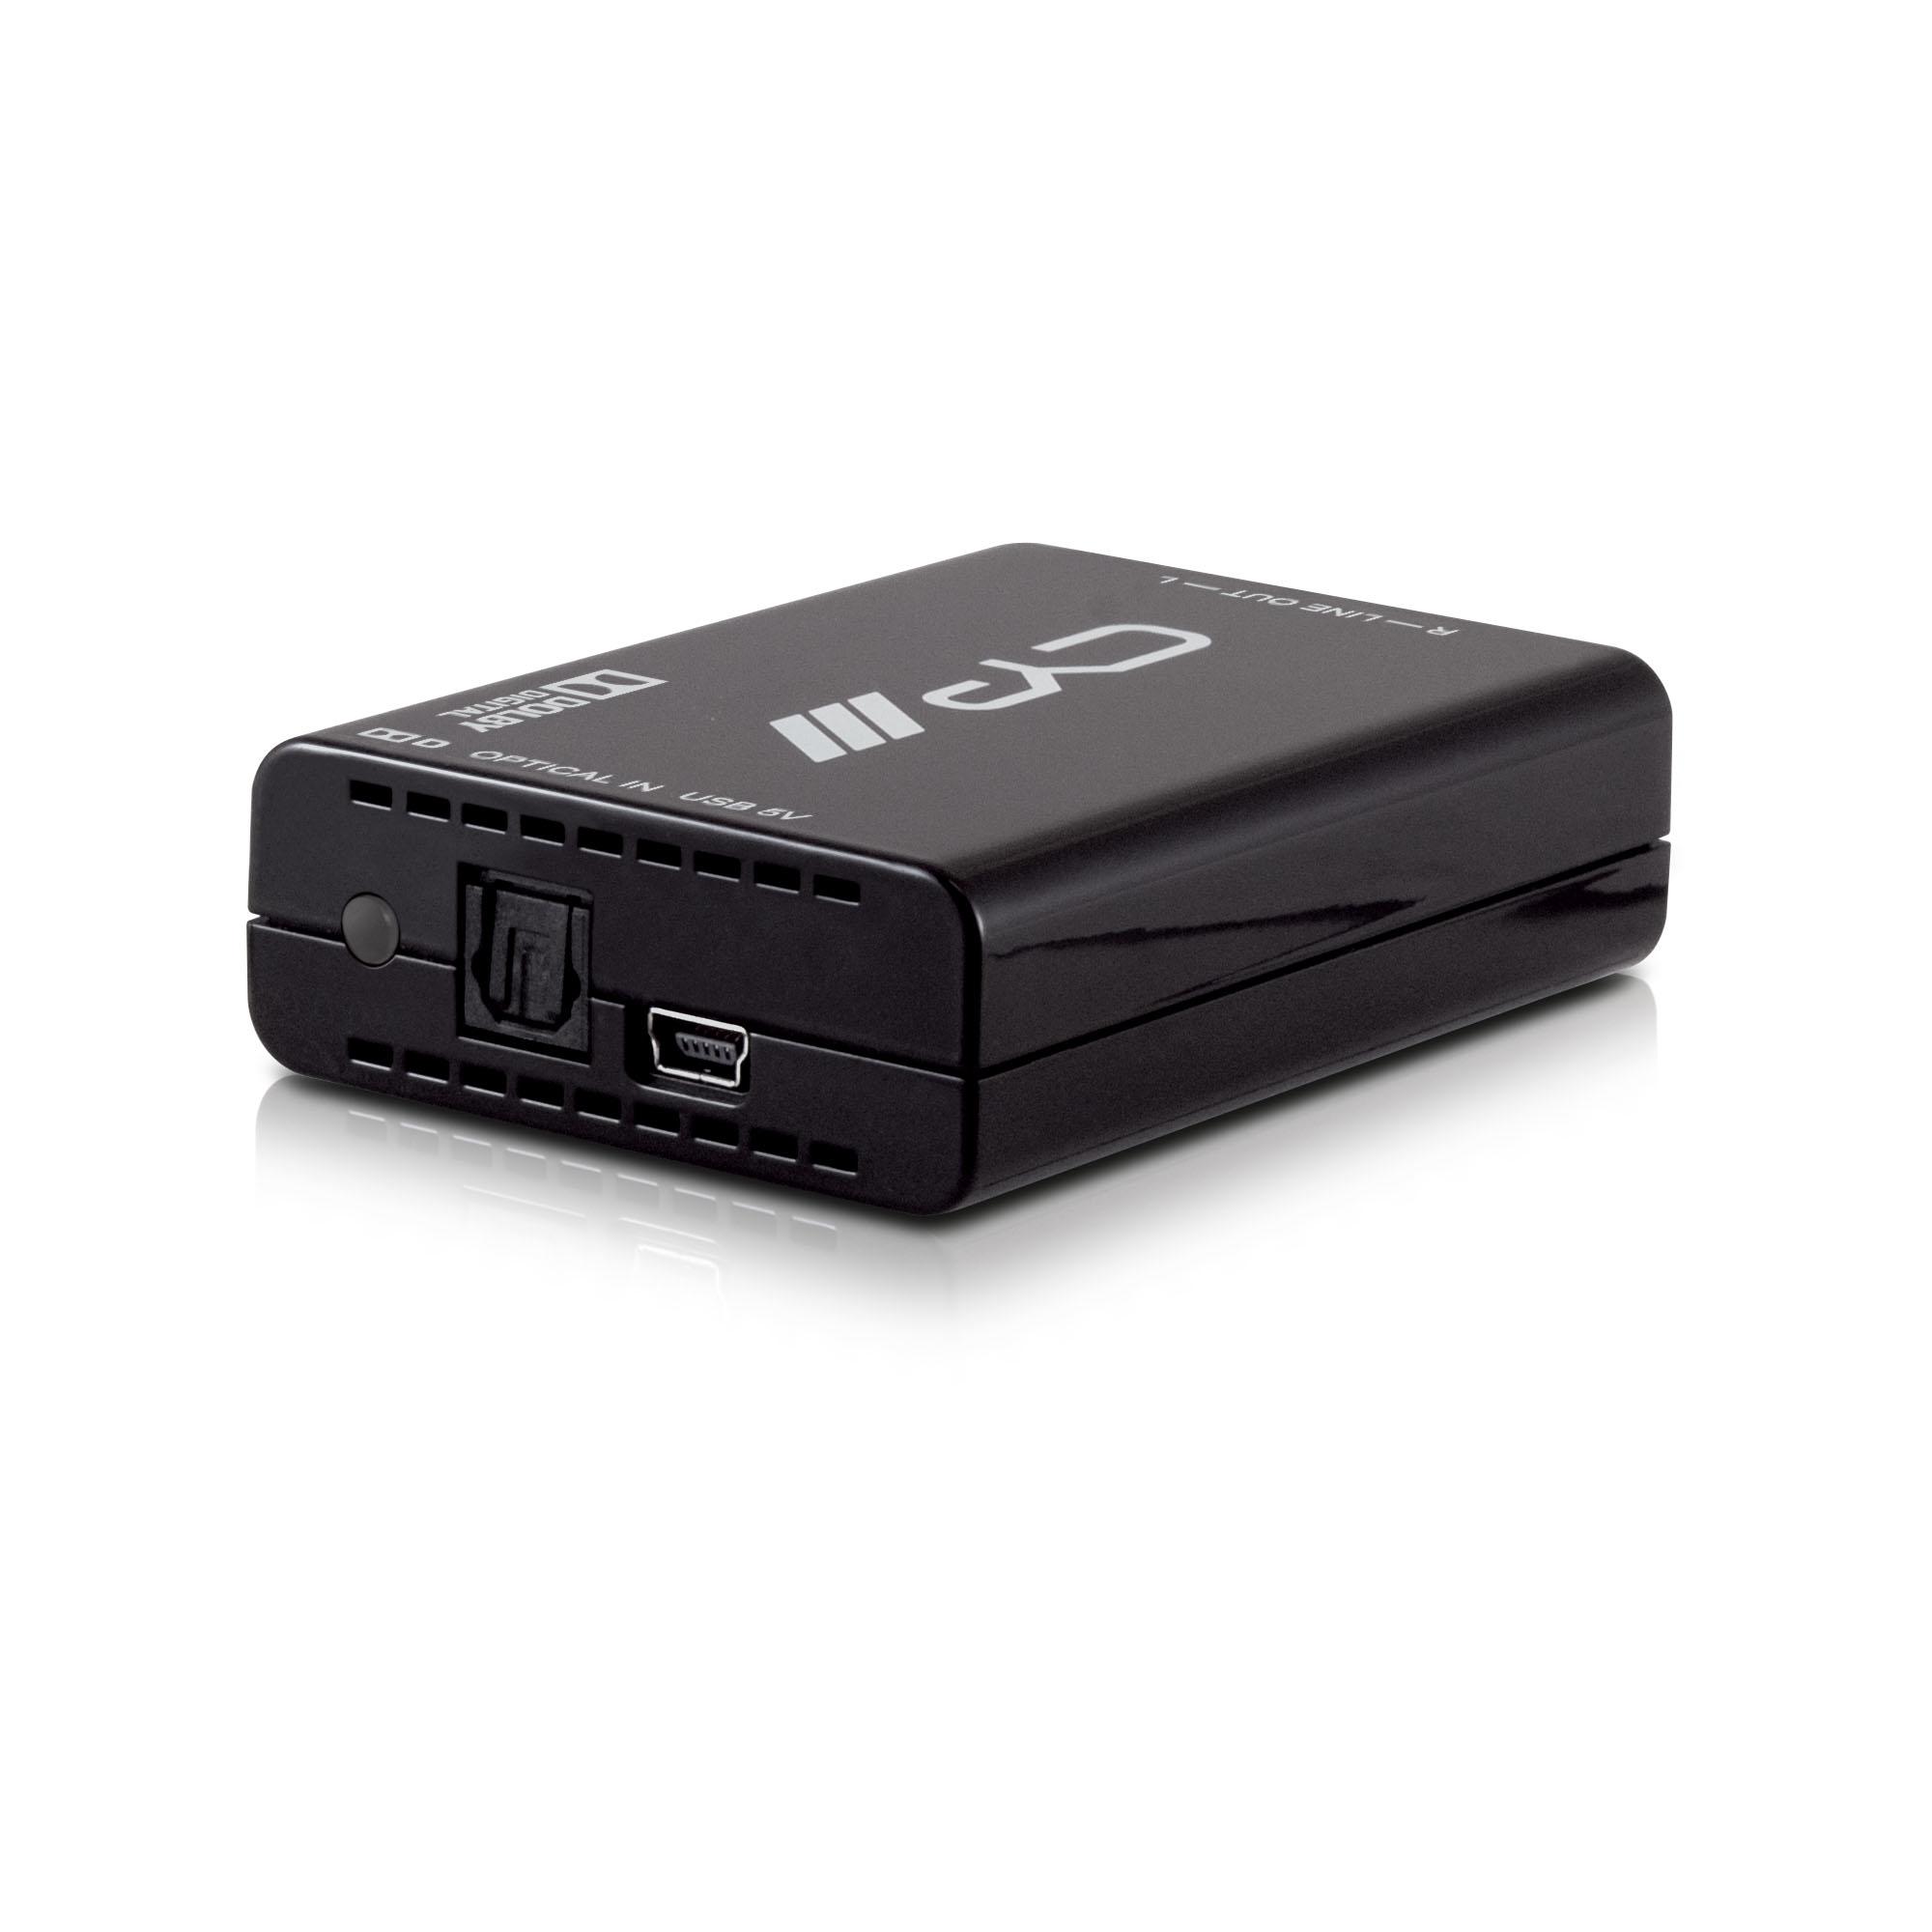 AU-D1D Optical to L/R Stereo Audio Converter (DAC) with Dolby Digital Decoder